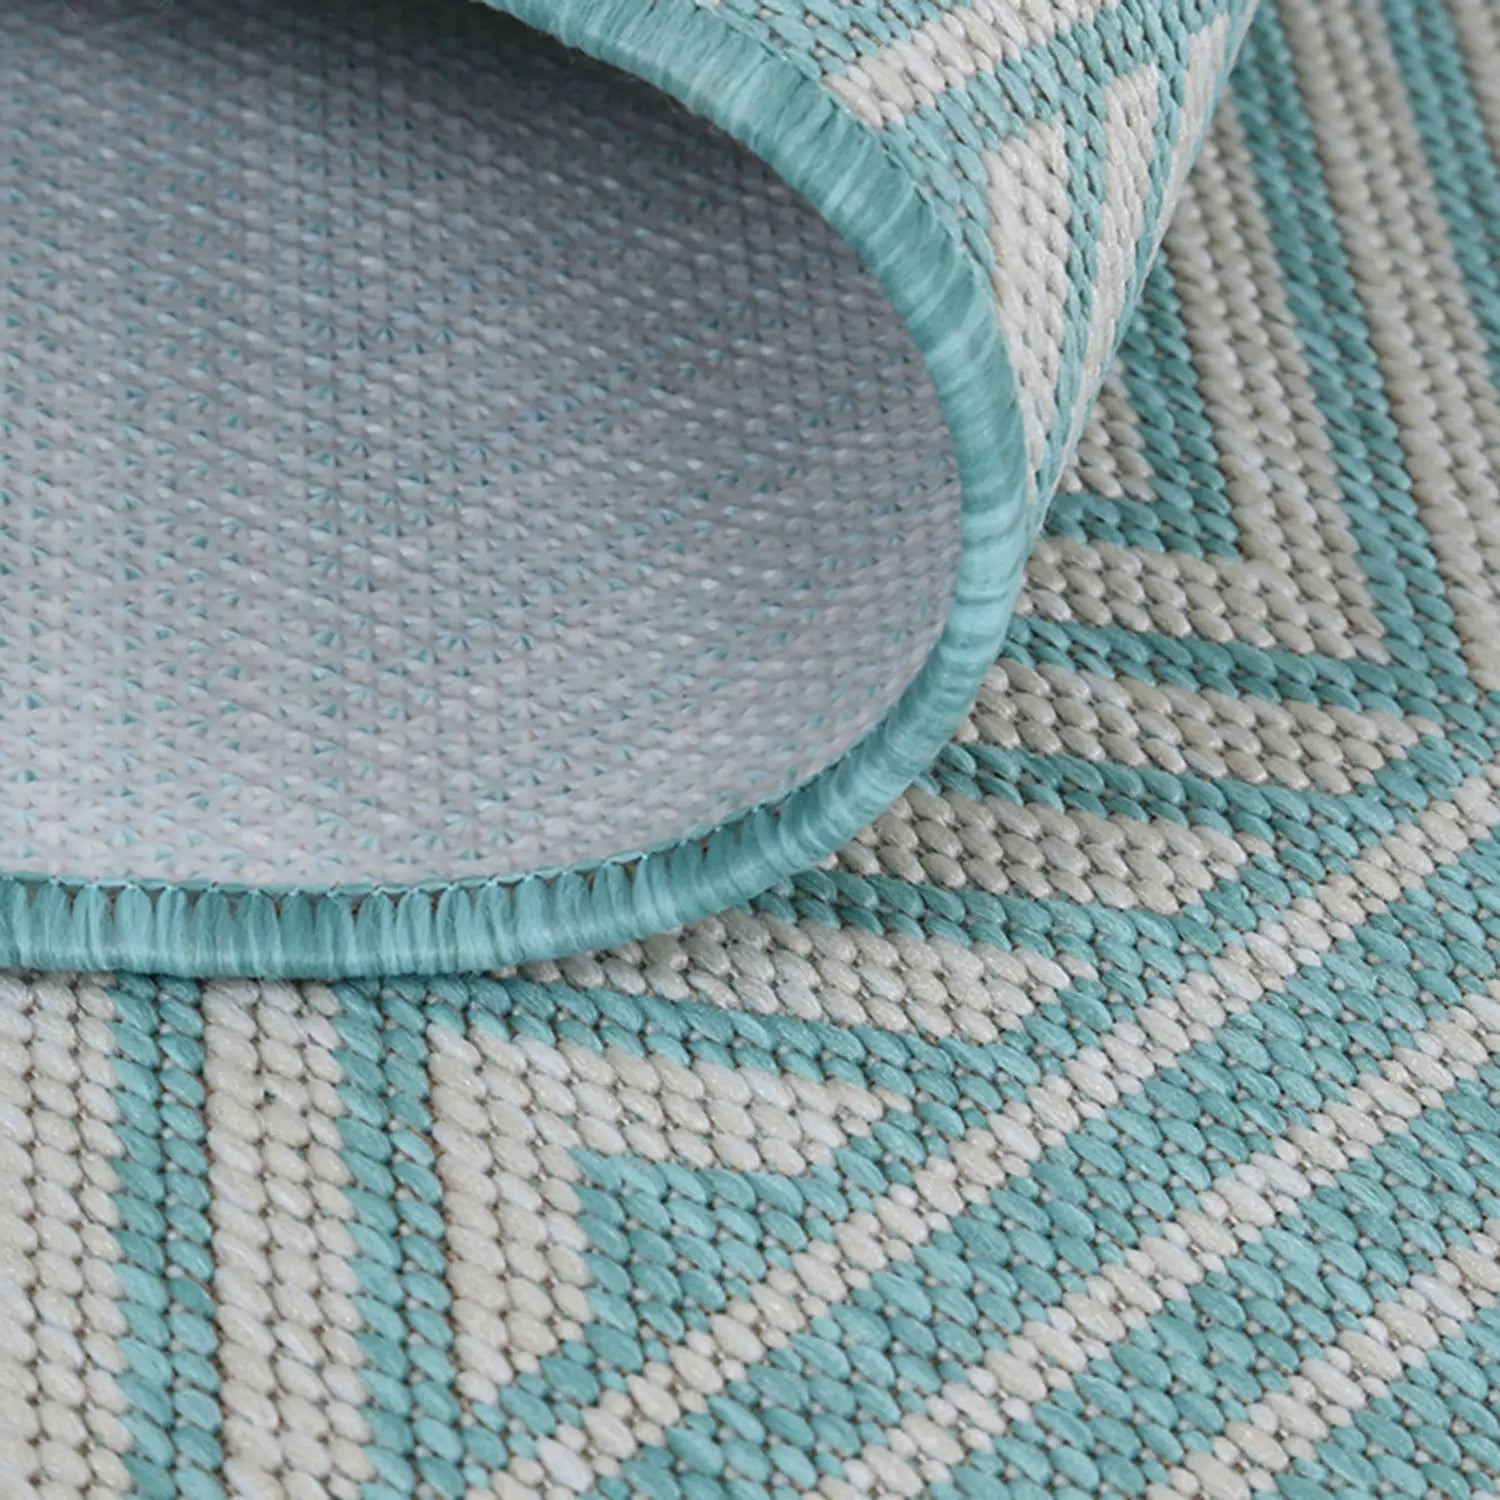 Elements Indoor/Outdoor Turquoise Rug - Rugs - Rugs a Million